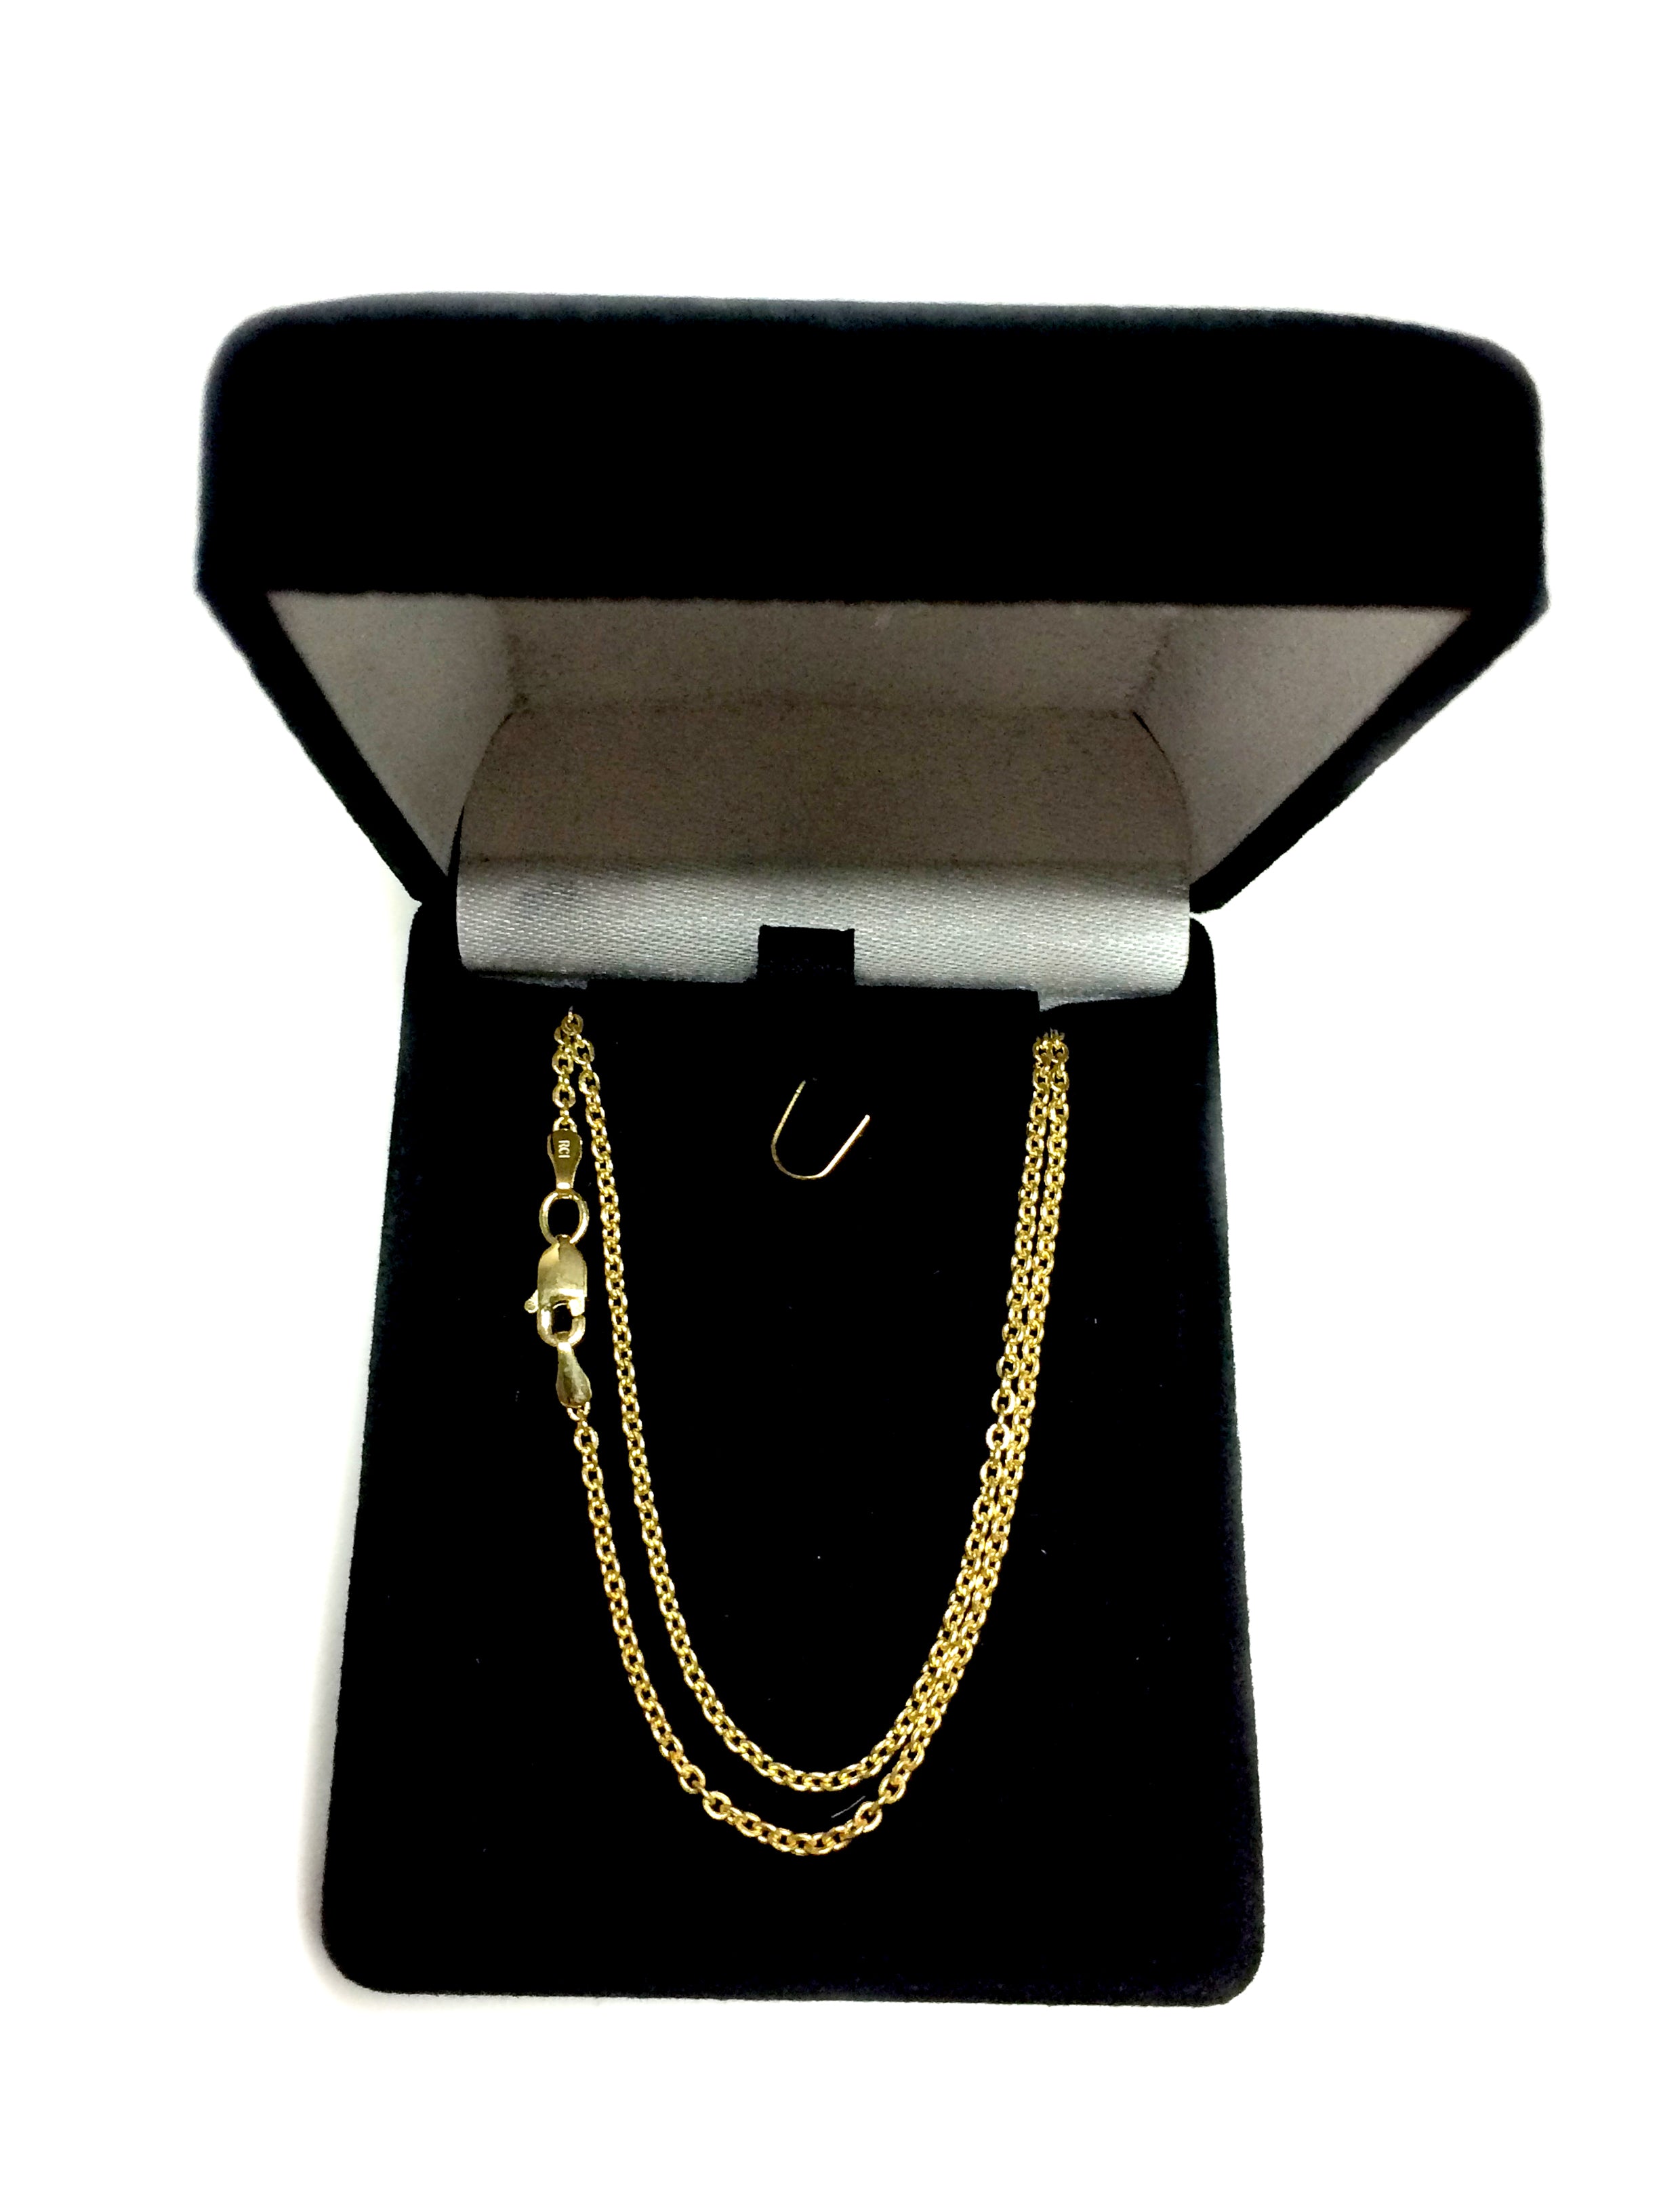 14k Yellow Gold Forsantina Chain Necklace, 1.9mm fine designer jewelry for men and women